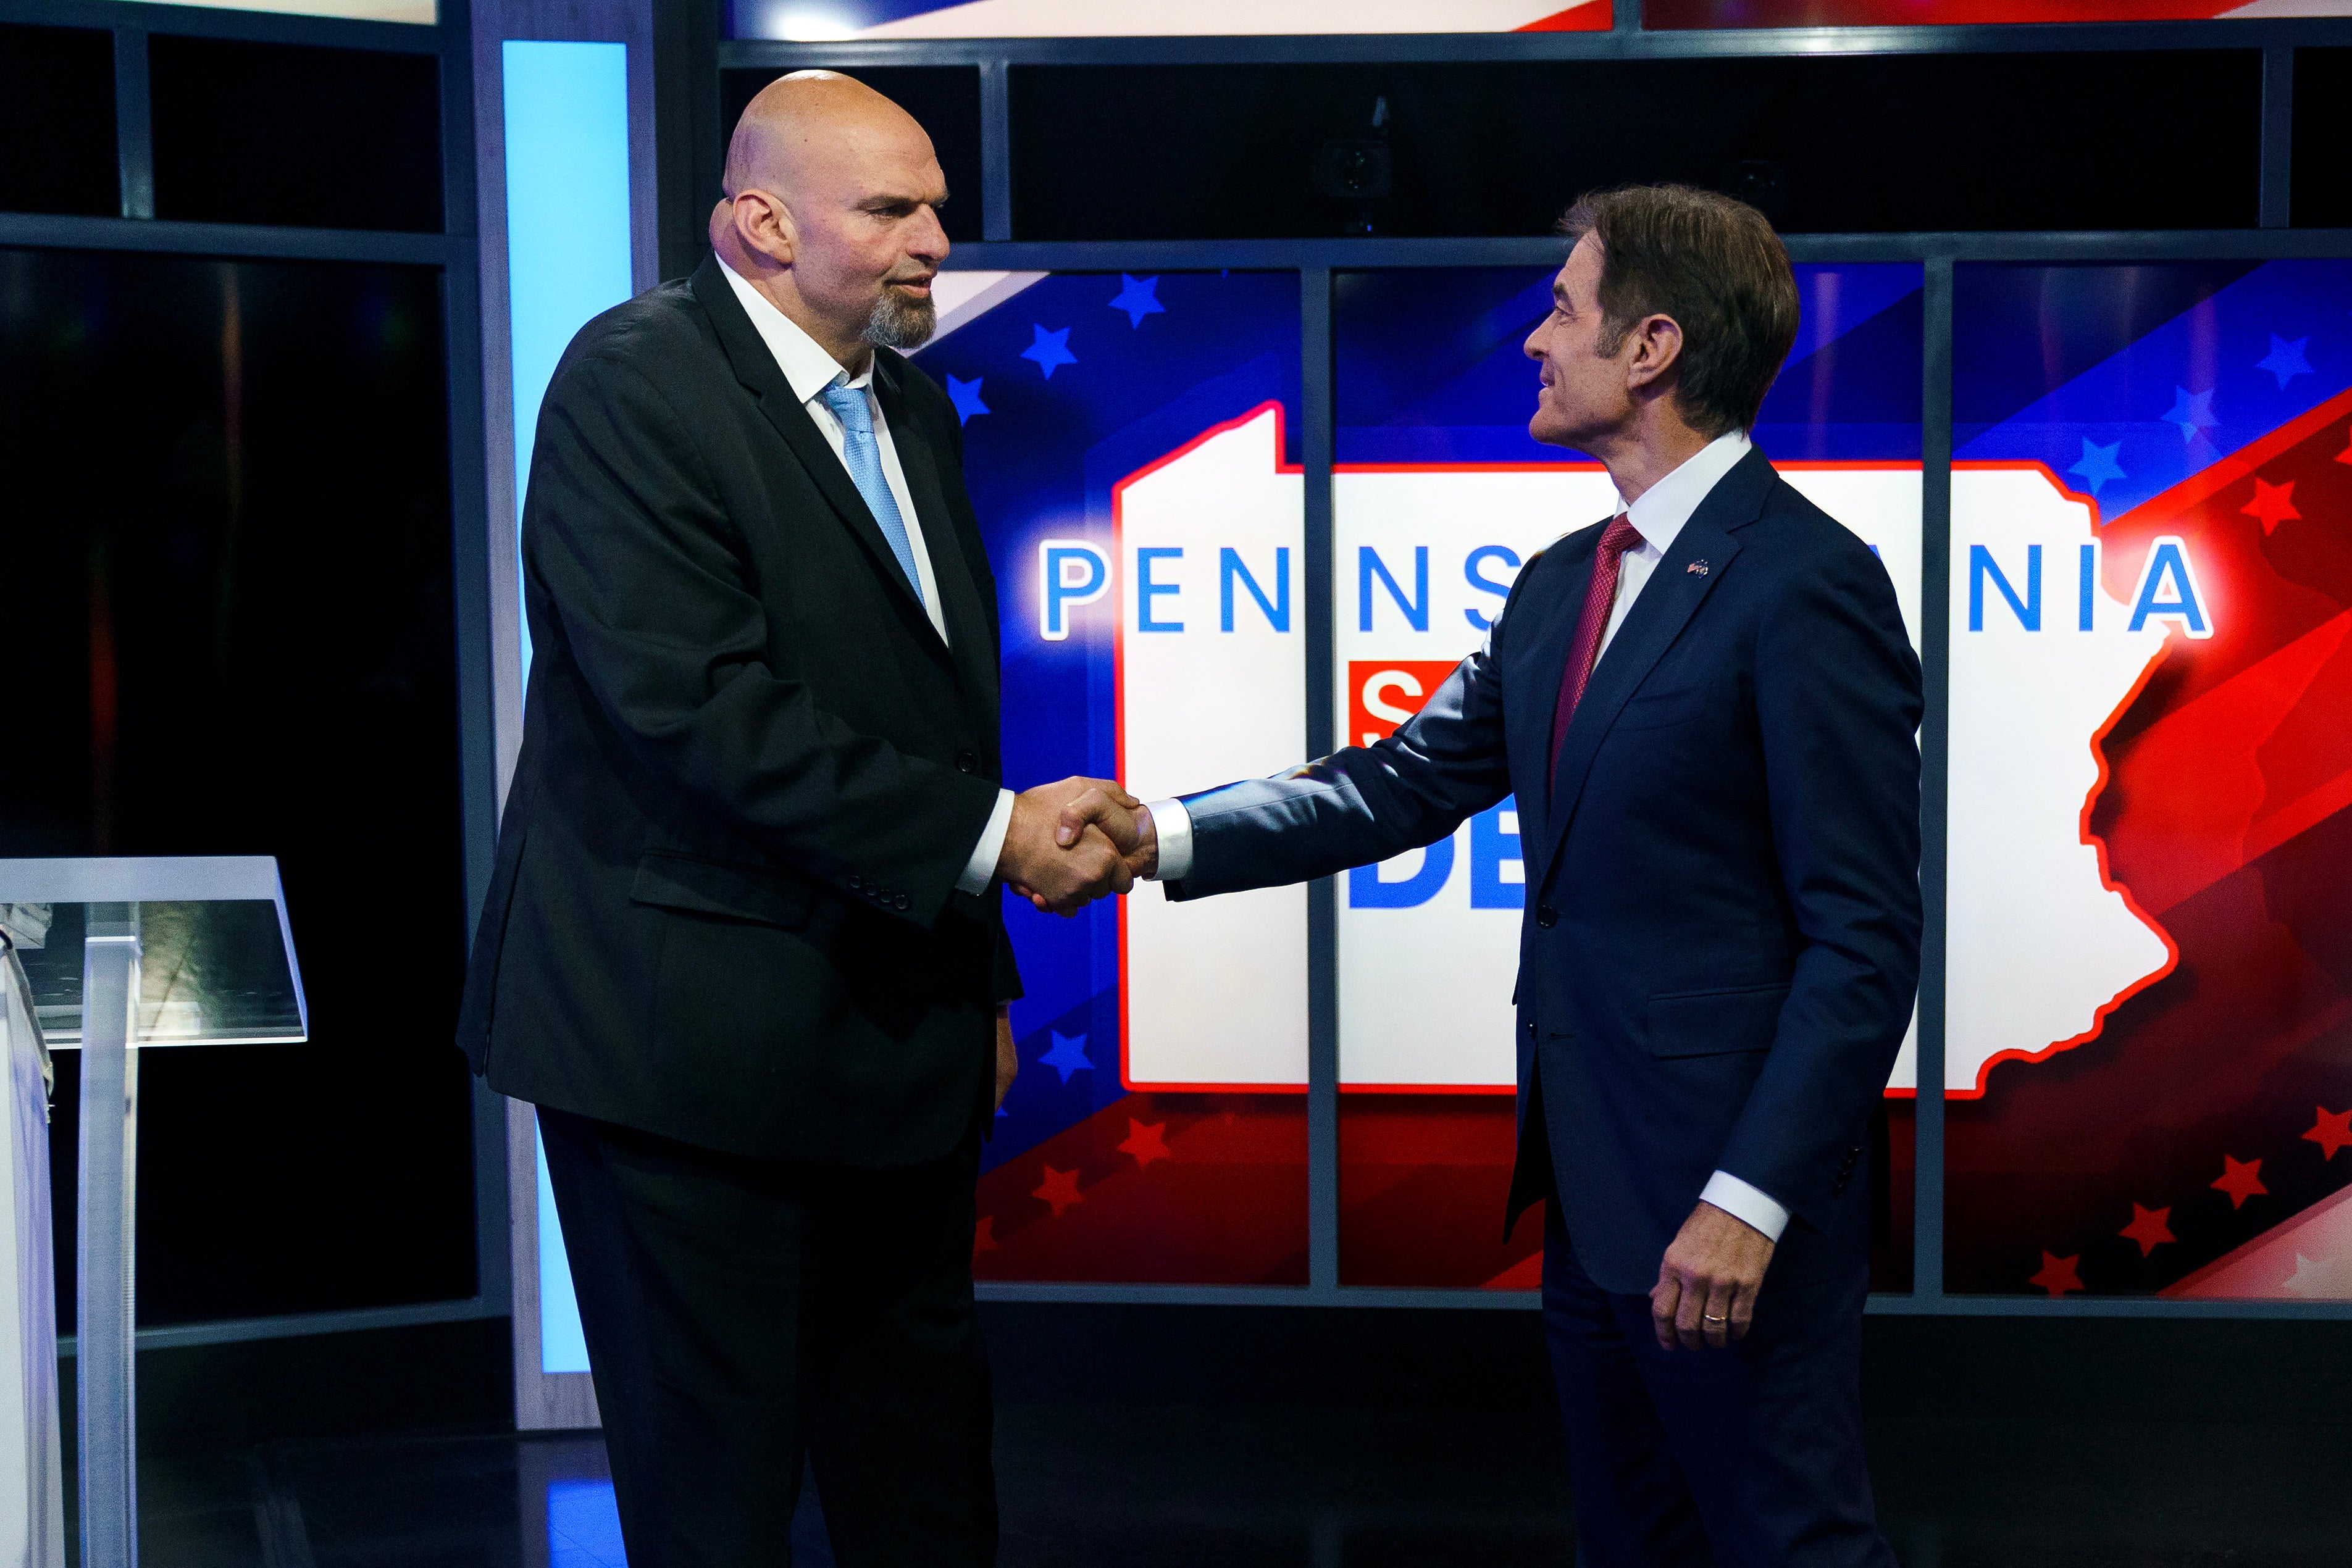 A handout photo made available by ABC27 shows Democratic candidate Lt. Gov. John Fetterman (left) and Republican Pennsylvania Senate candidate Dr Mehmet Oz (right) shaking hands prior to the Nexstar Pennsylvania Senate Debate at WHTM ABC27 in Harrisburg, Pennsylvania, USA, 25 October 2022